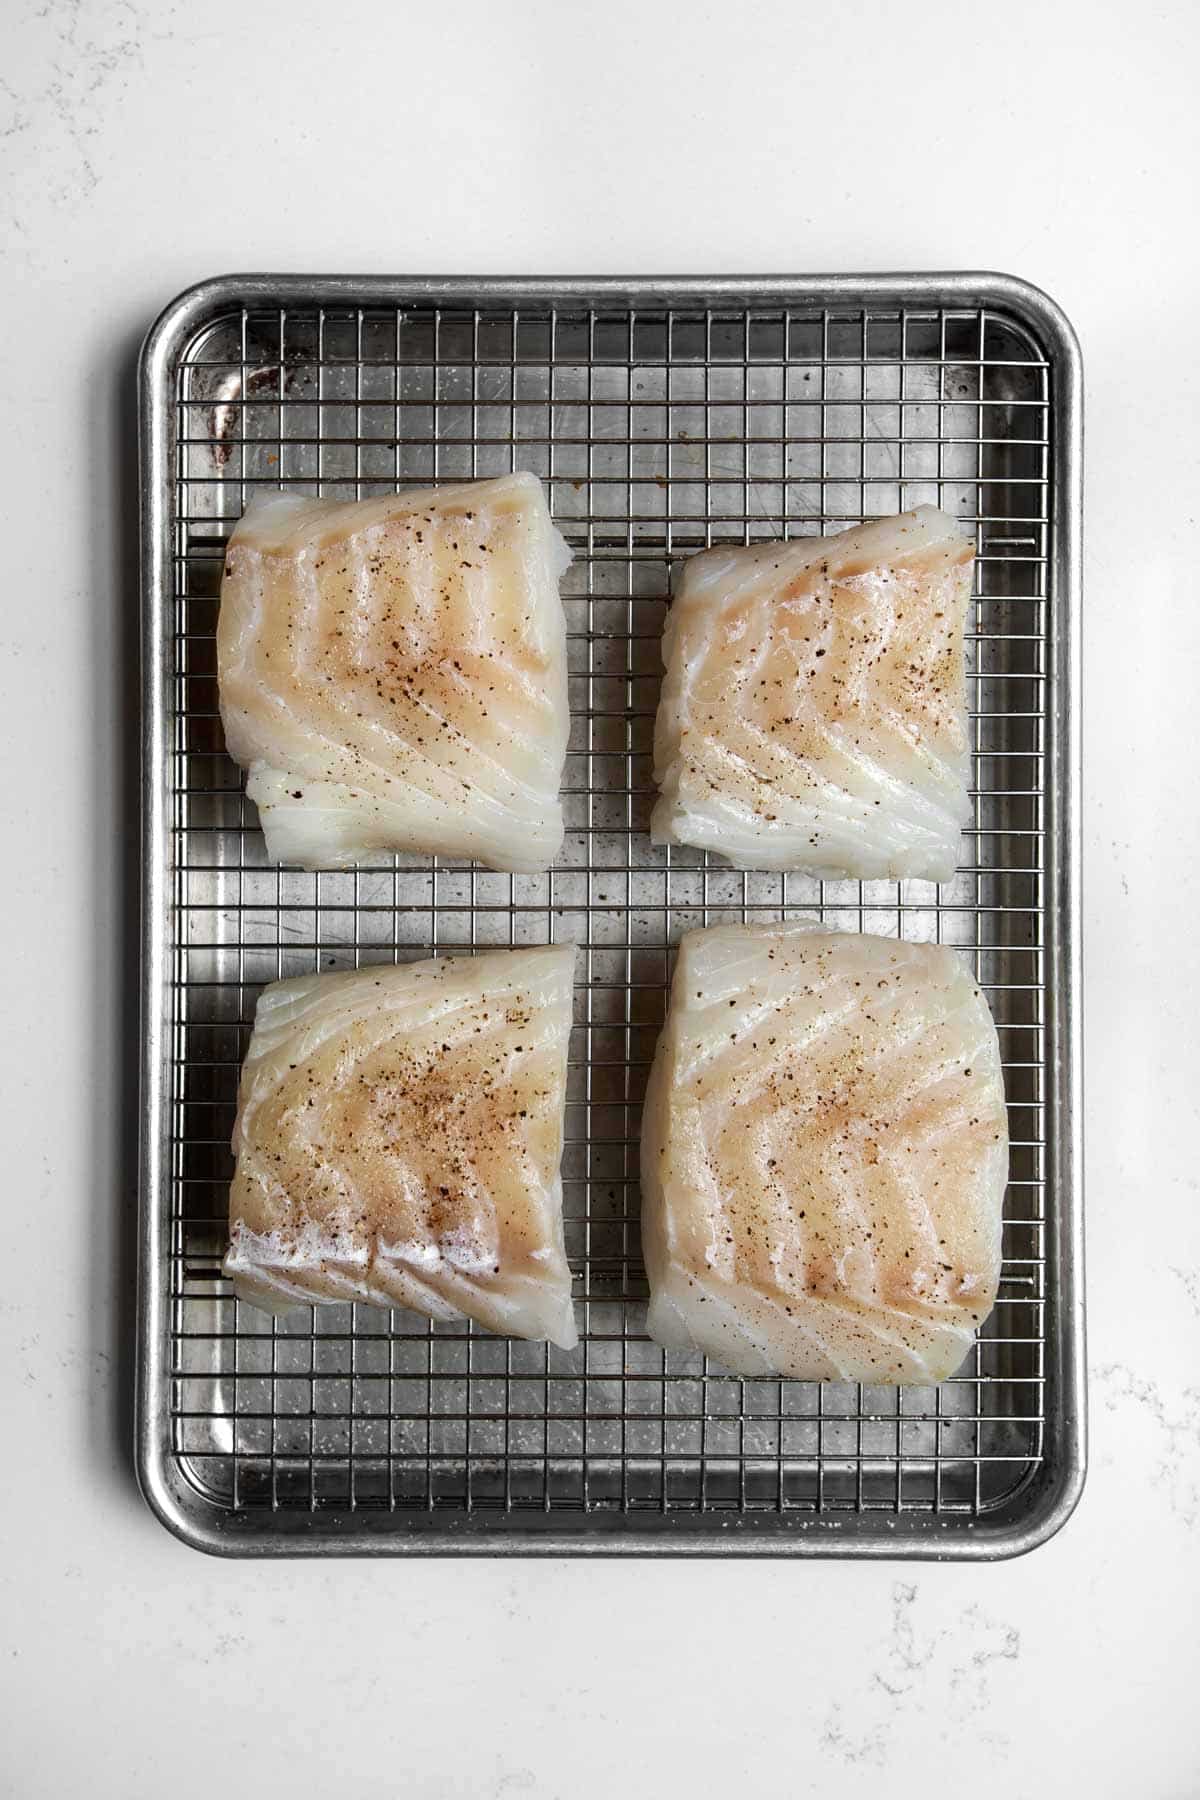 Four pieces of cod seasoned on a wire rack.